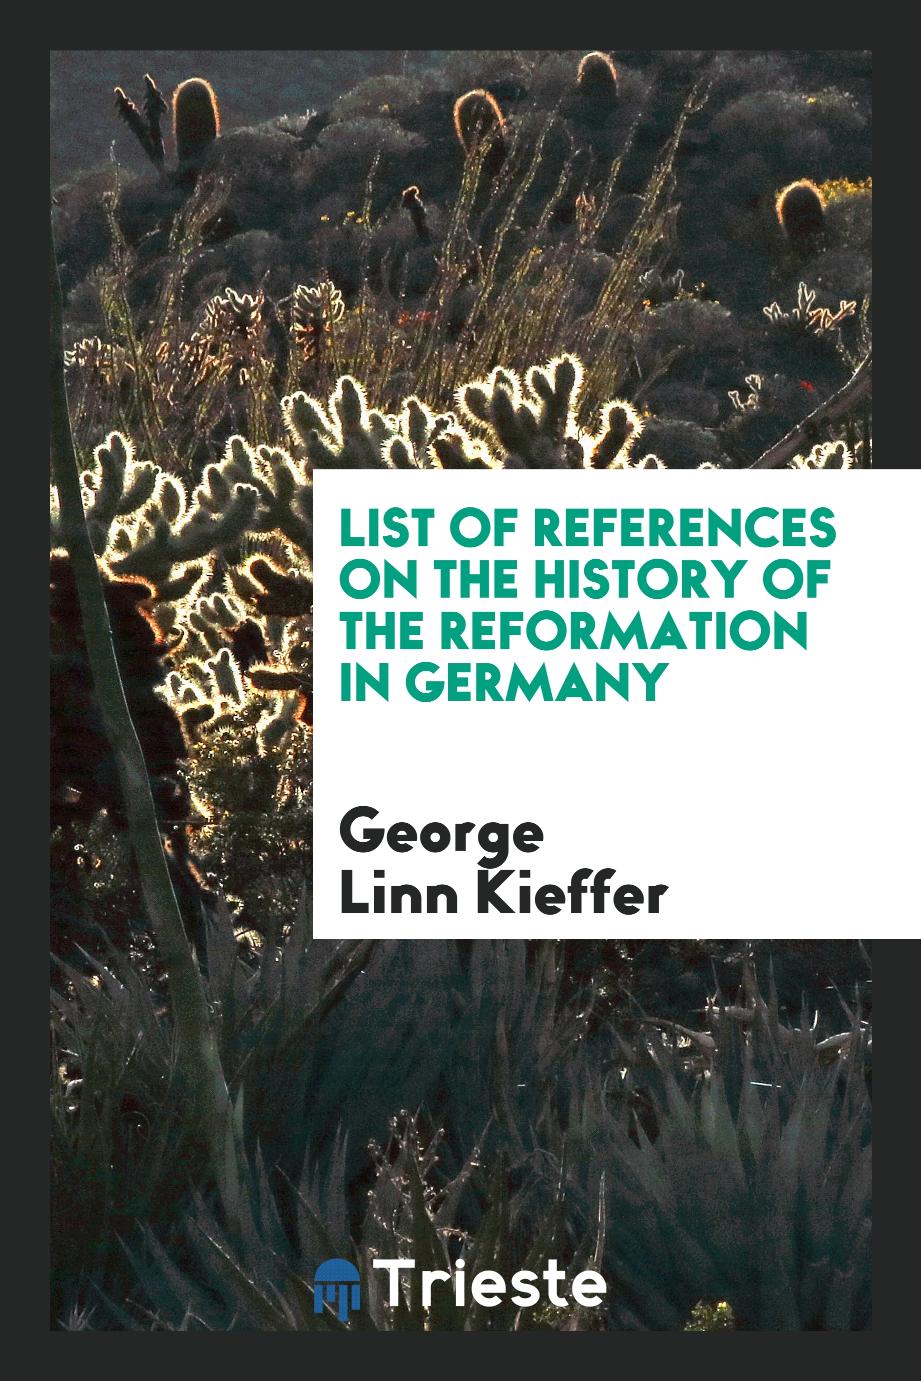 List of References on the History of the Reformation in Germany